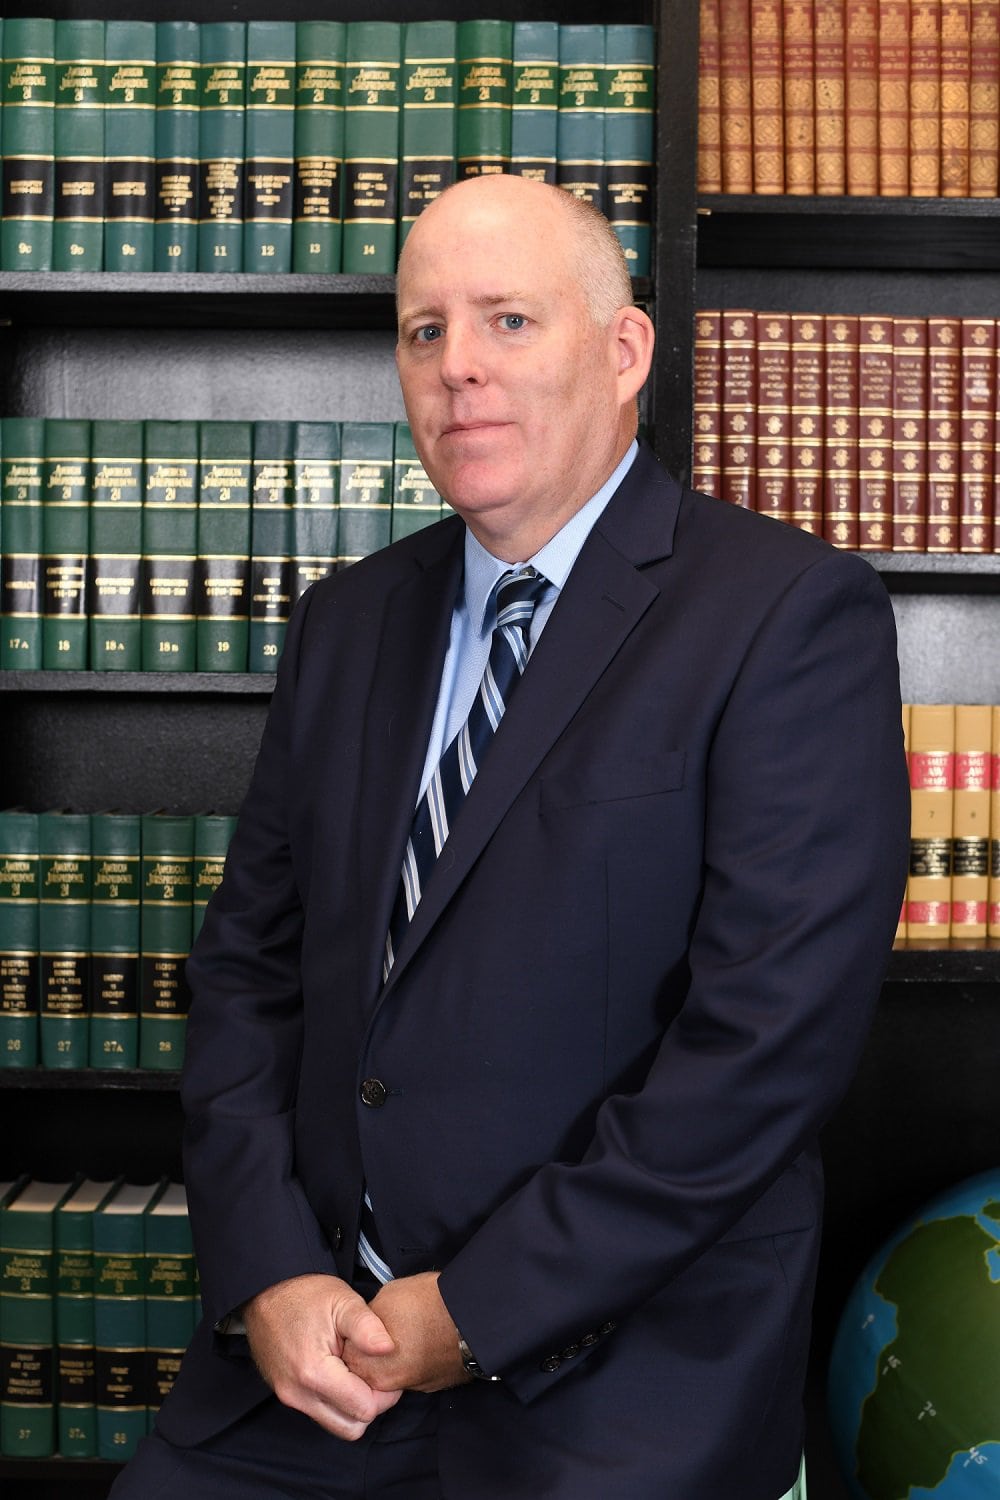 Portrait of a man representing R&G Personal Injury Lawyers, emphasizing the team's professionalism and expertise. The image is contextualized within the page by highlighting 'Our Attorneys,' providing a glimpse into the skilled legal professionals associated with the firm.